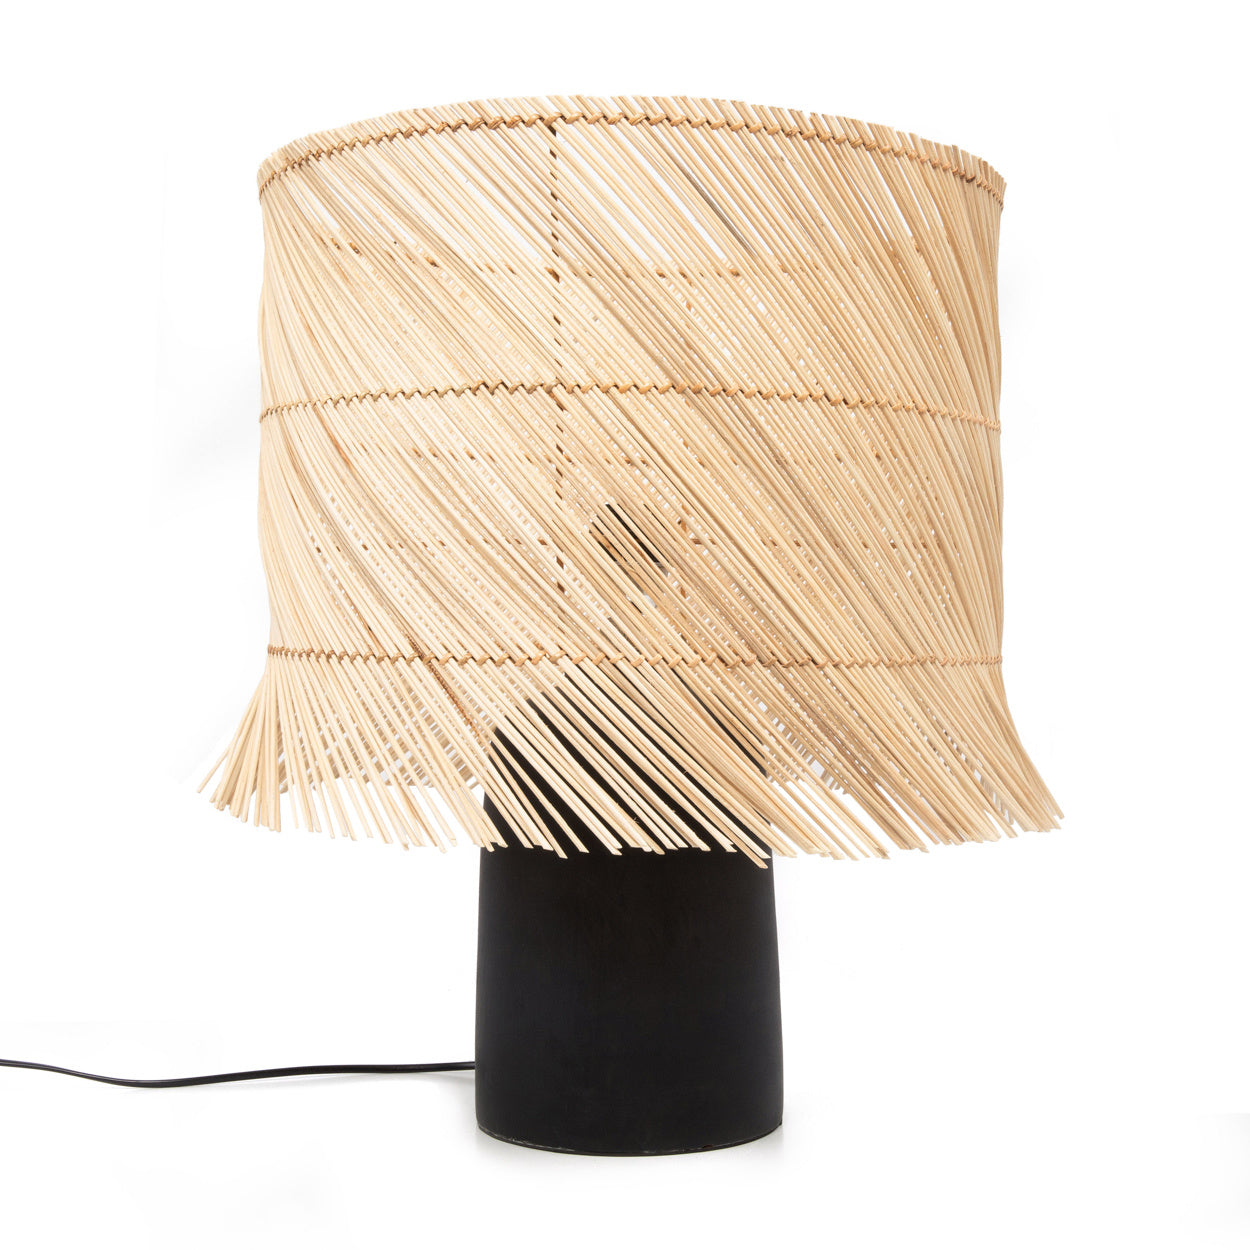 THE RATTAN Table Lamp Natural Black FRONT VIEW